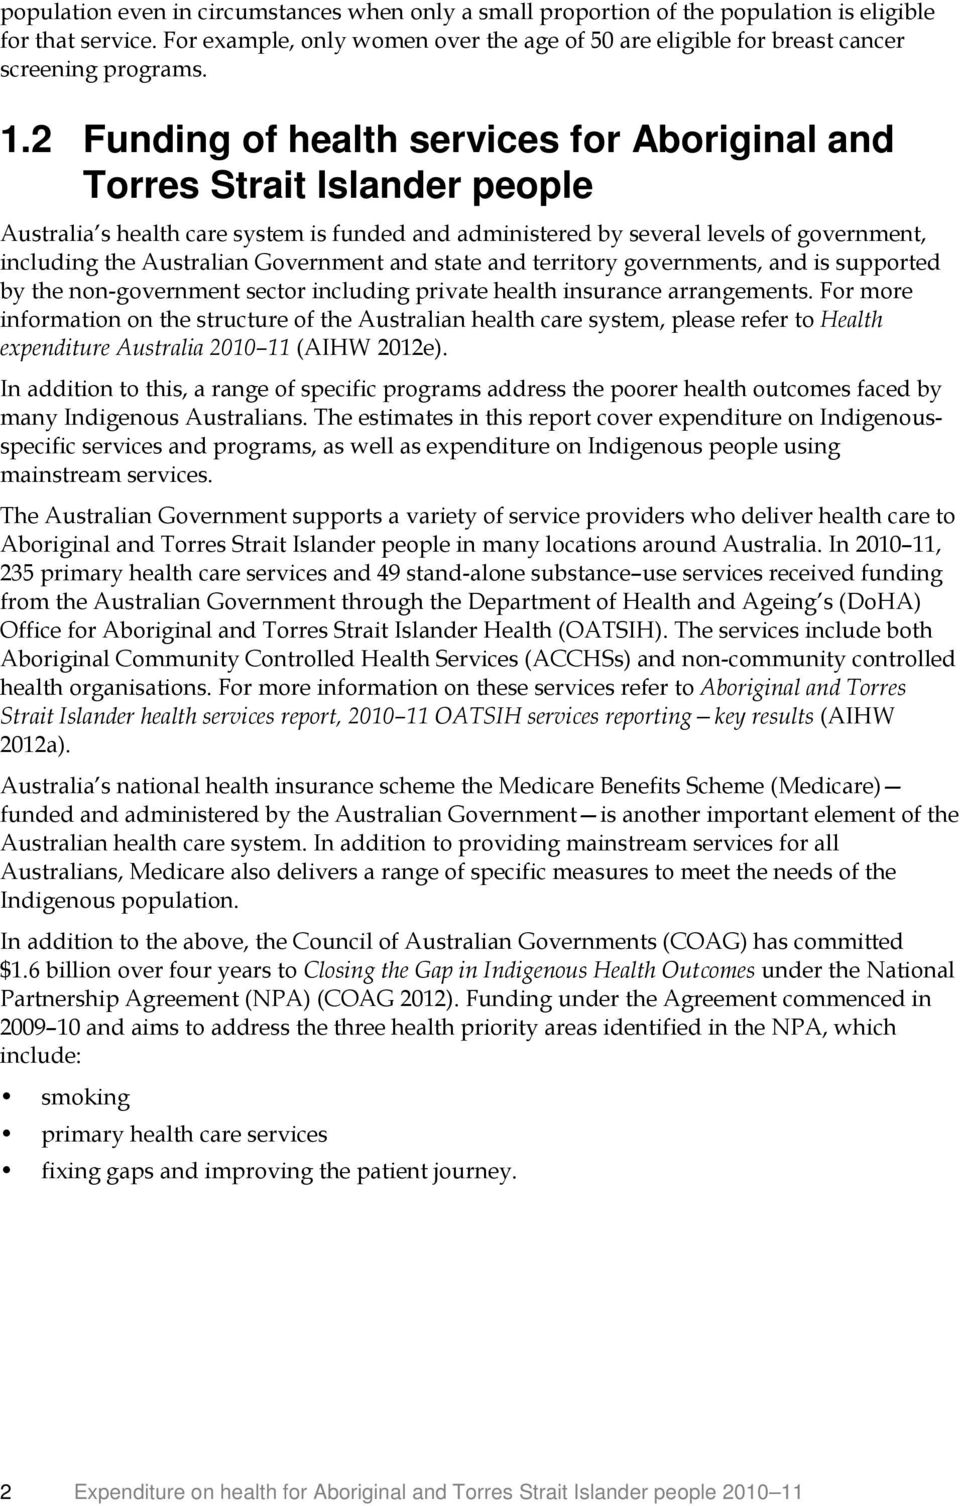 2 Funding of health services for Aboriginal and Torres Strait Islander people Australia s health care system is funded and administered by several levels of government, including the Australian